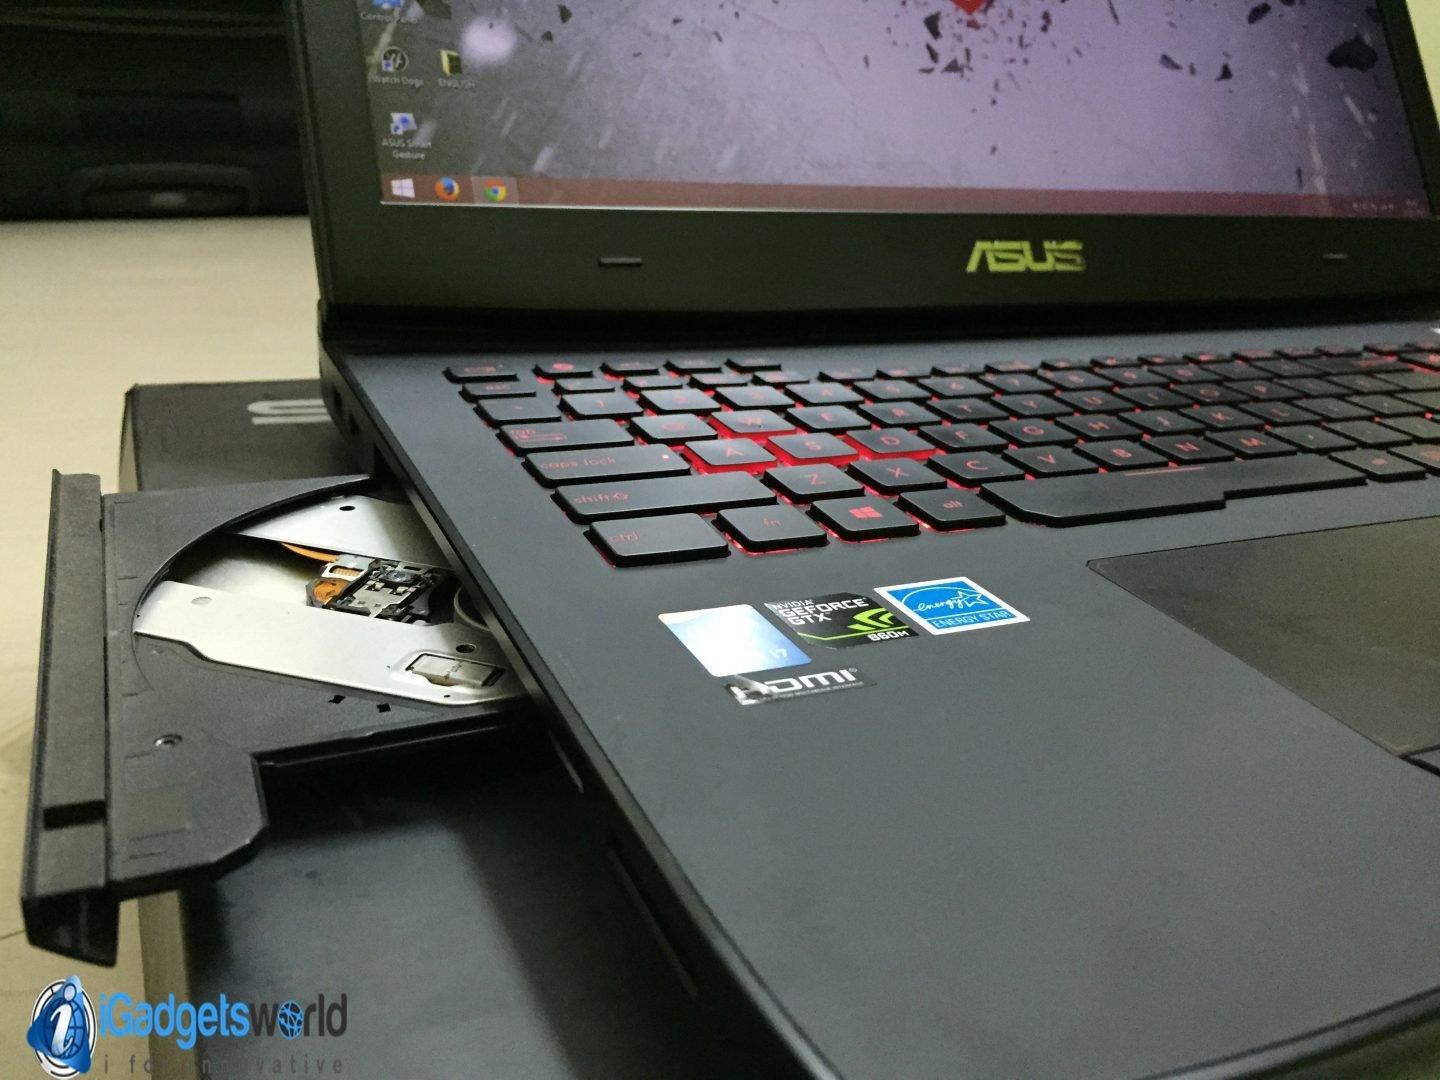 Asus ROG G751J Review: A Slightly Overpriced Ultra High-End Gaming Laptop - 13